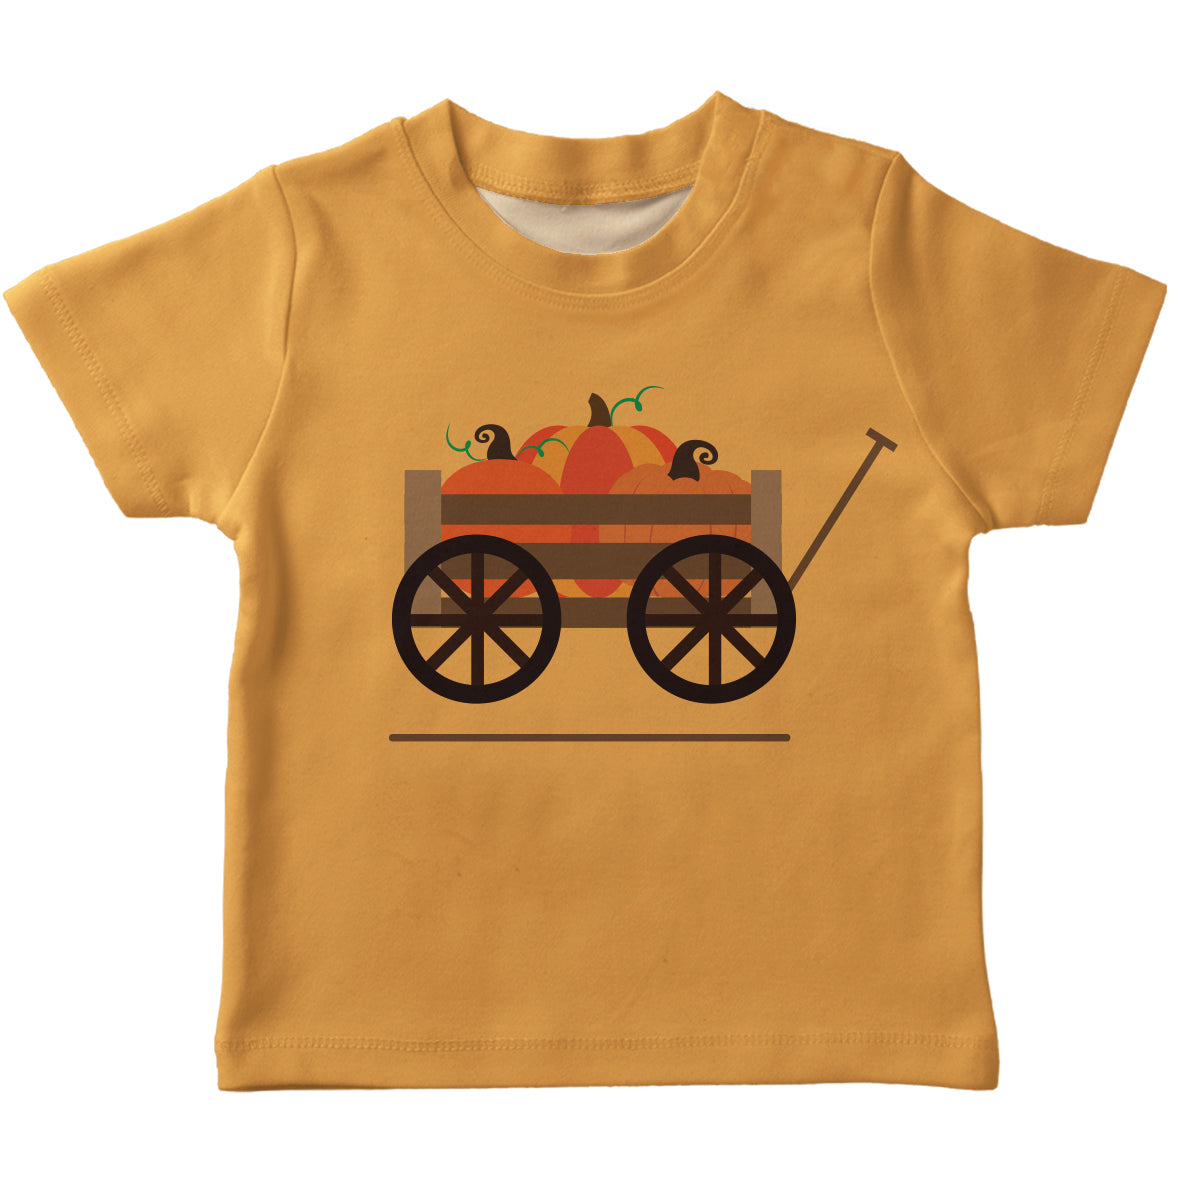 Boys brown and yellow pumpkins tee shirt with name - Wimziy&Co.